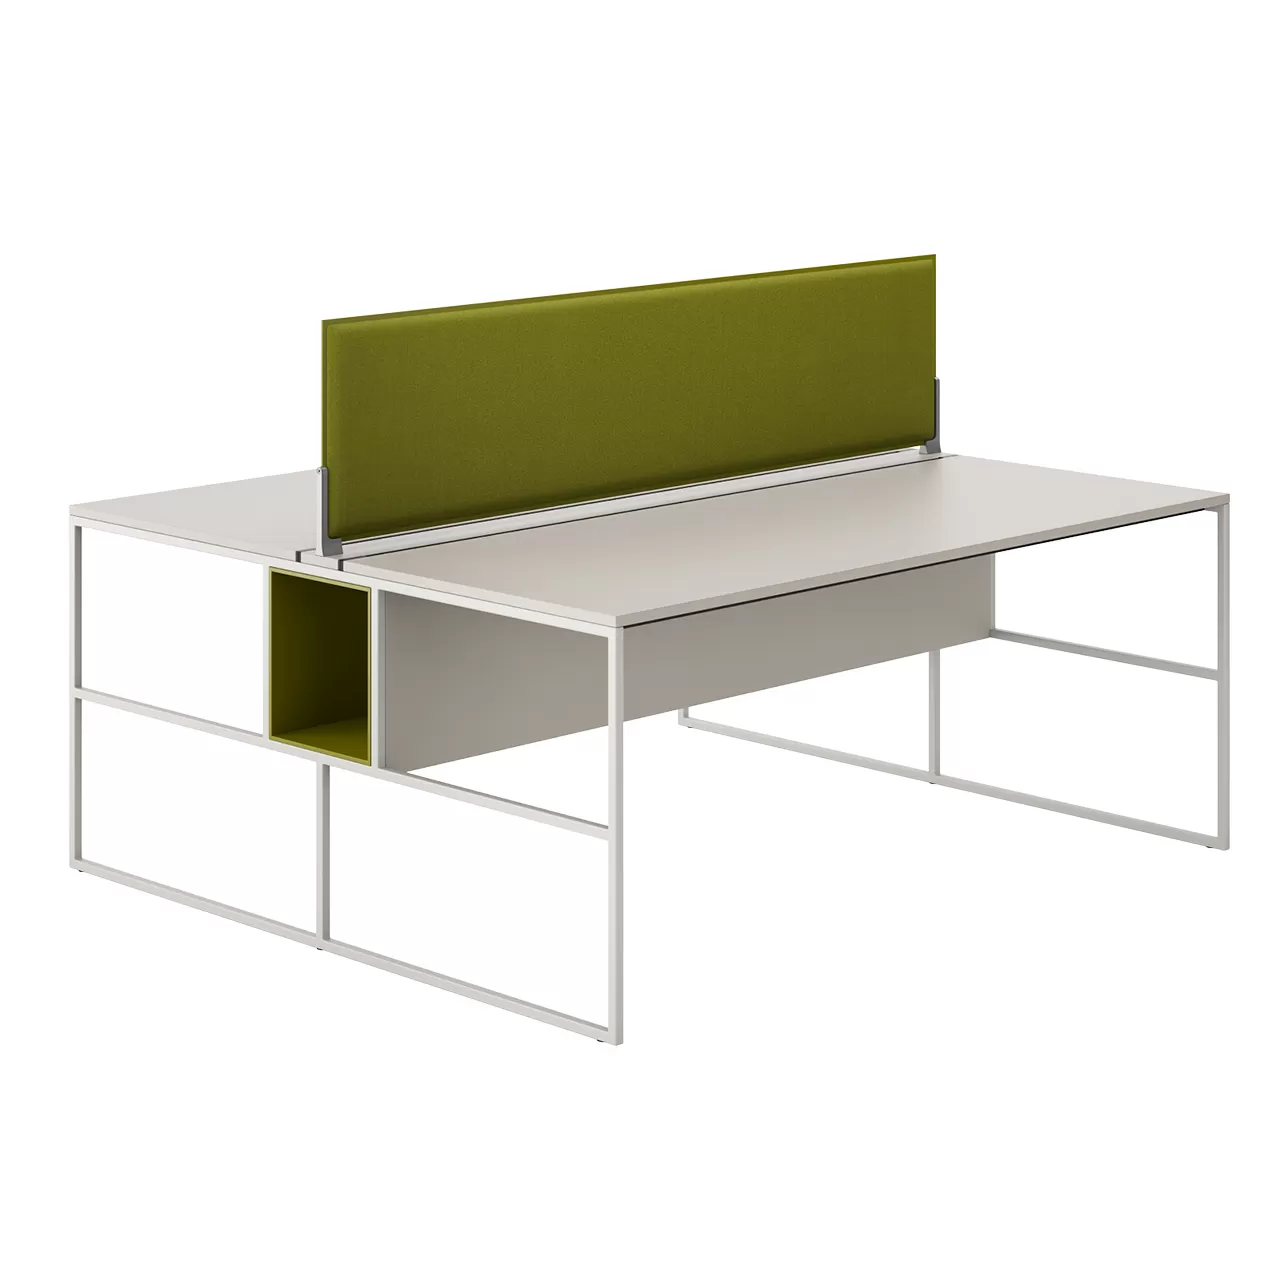 Office – venti-double-table-system-by-mdf-italia